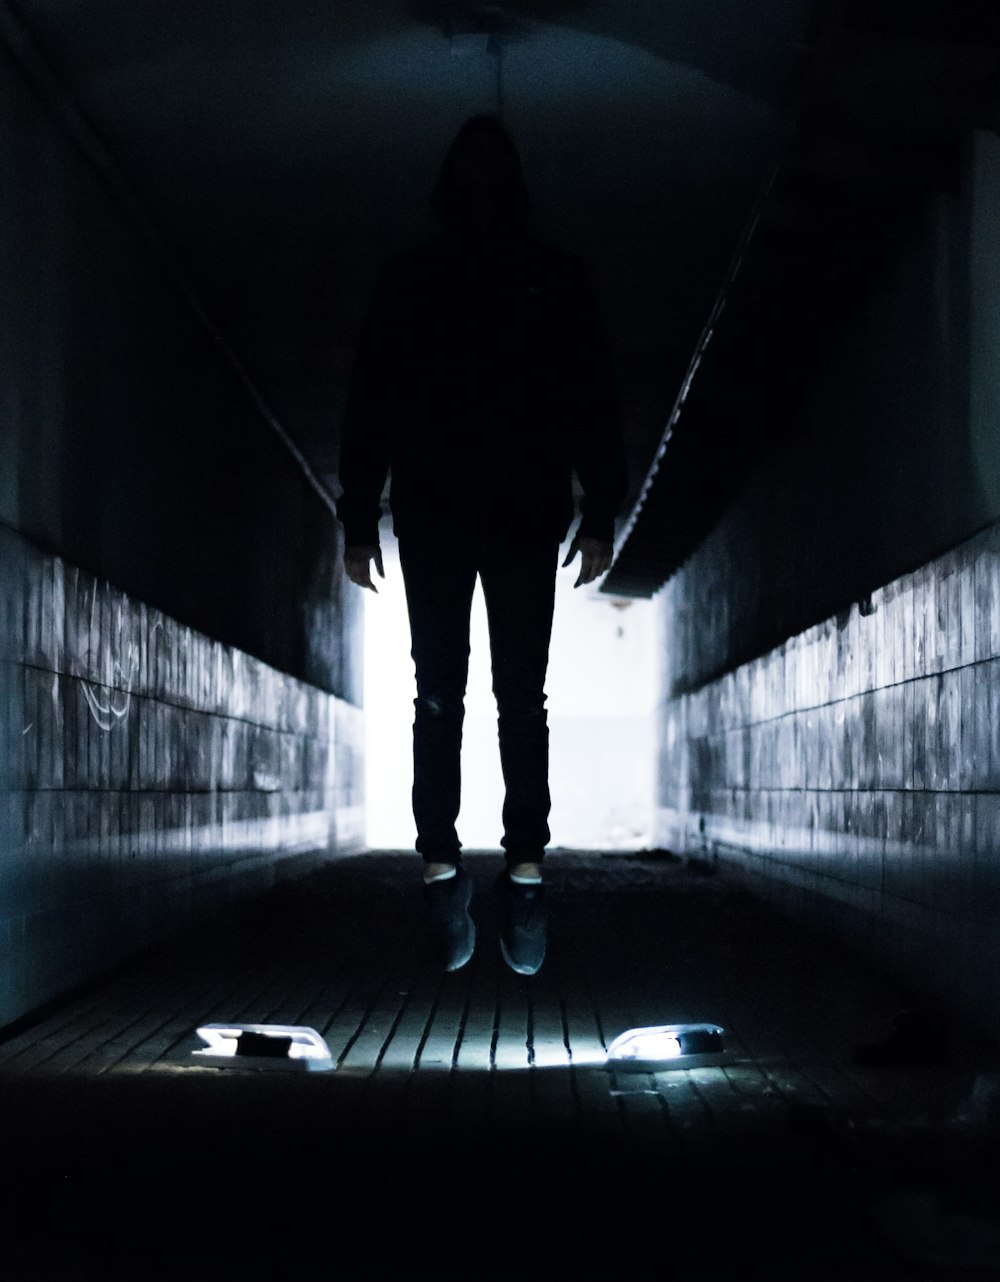 a person standing in a dark tunnel with a skateboard